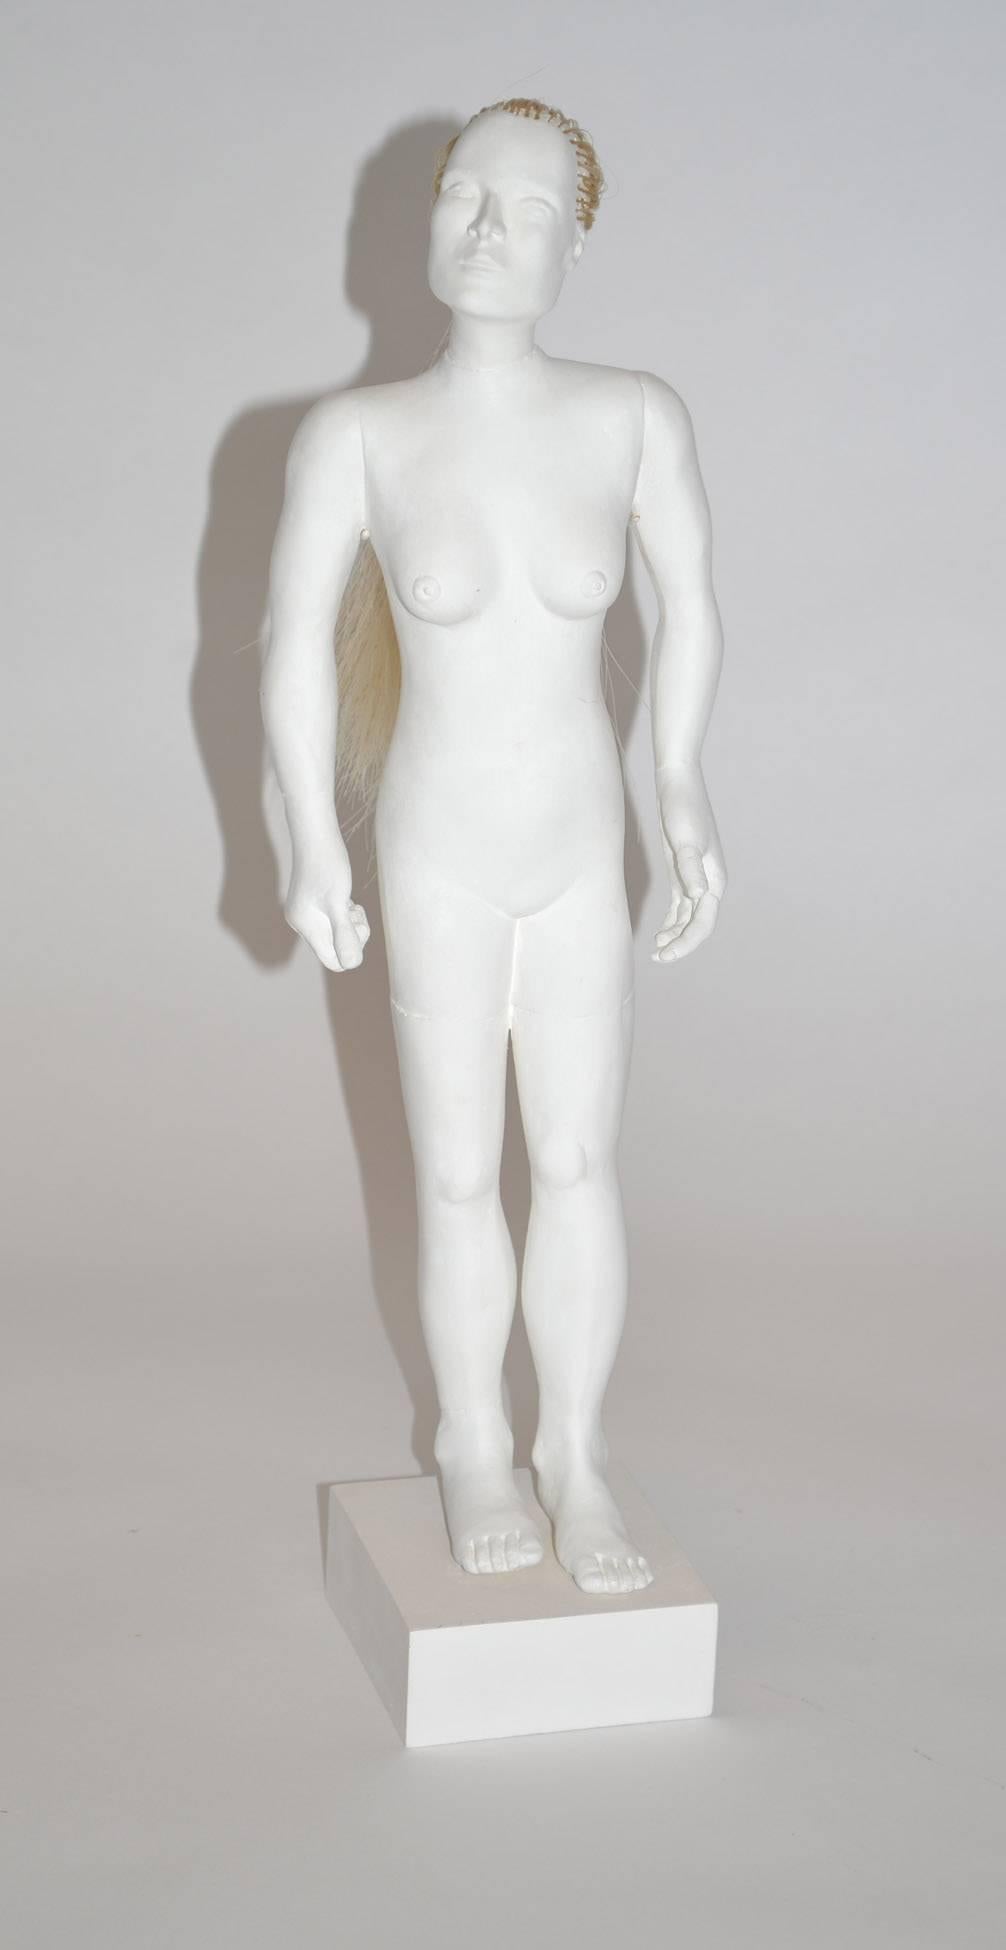 Plaster Sculpture by Judith Shea Human Female Form Mixed-Media, 2002